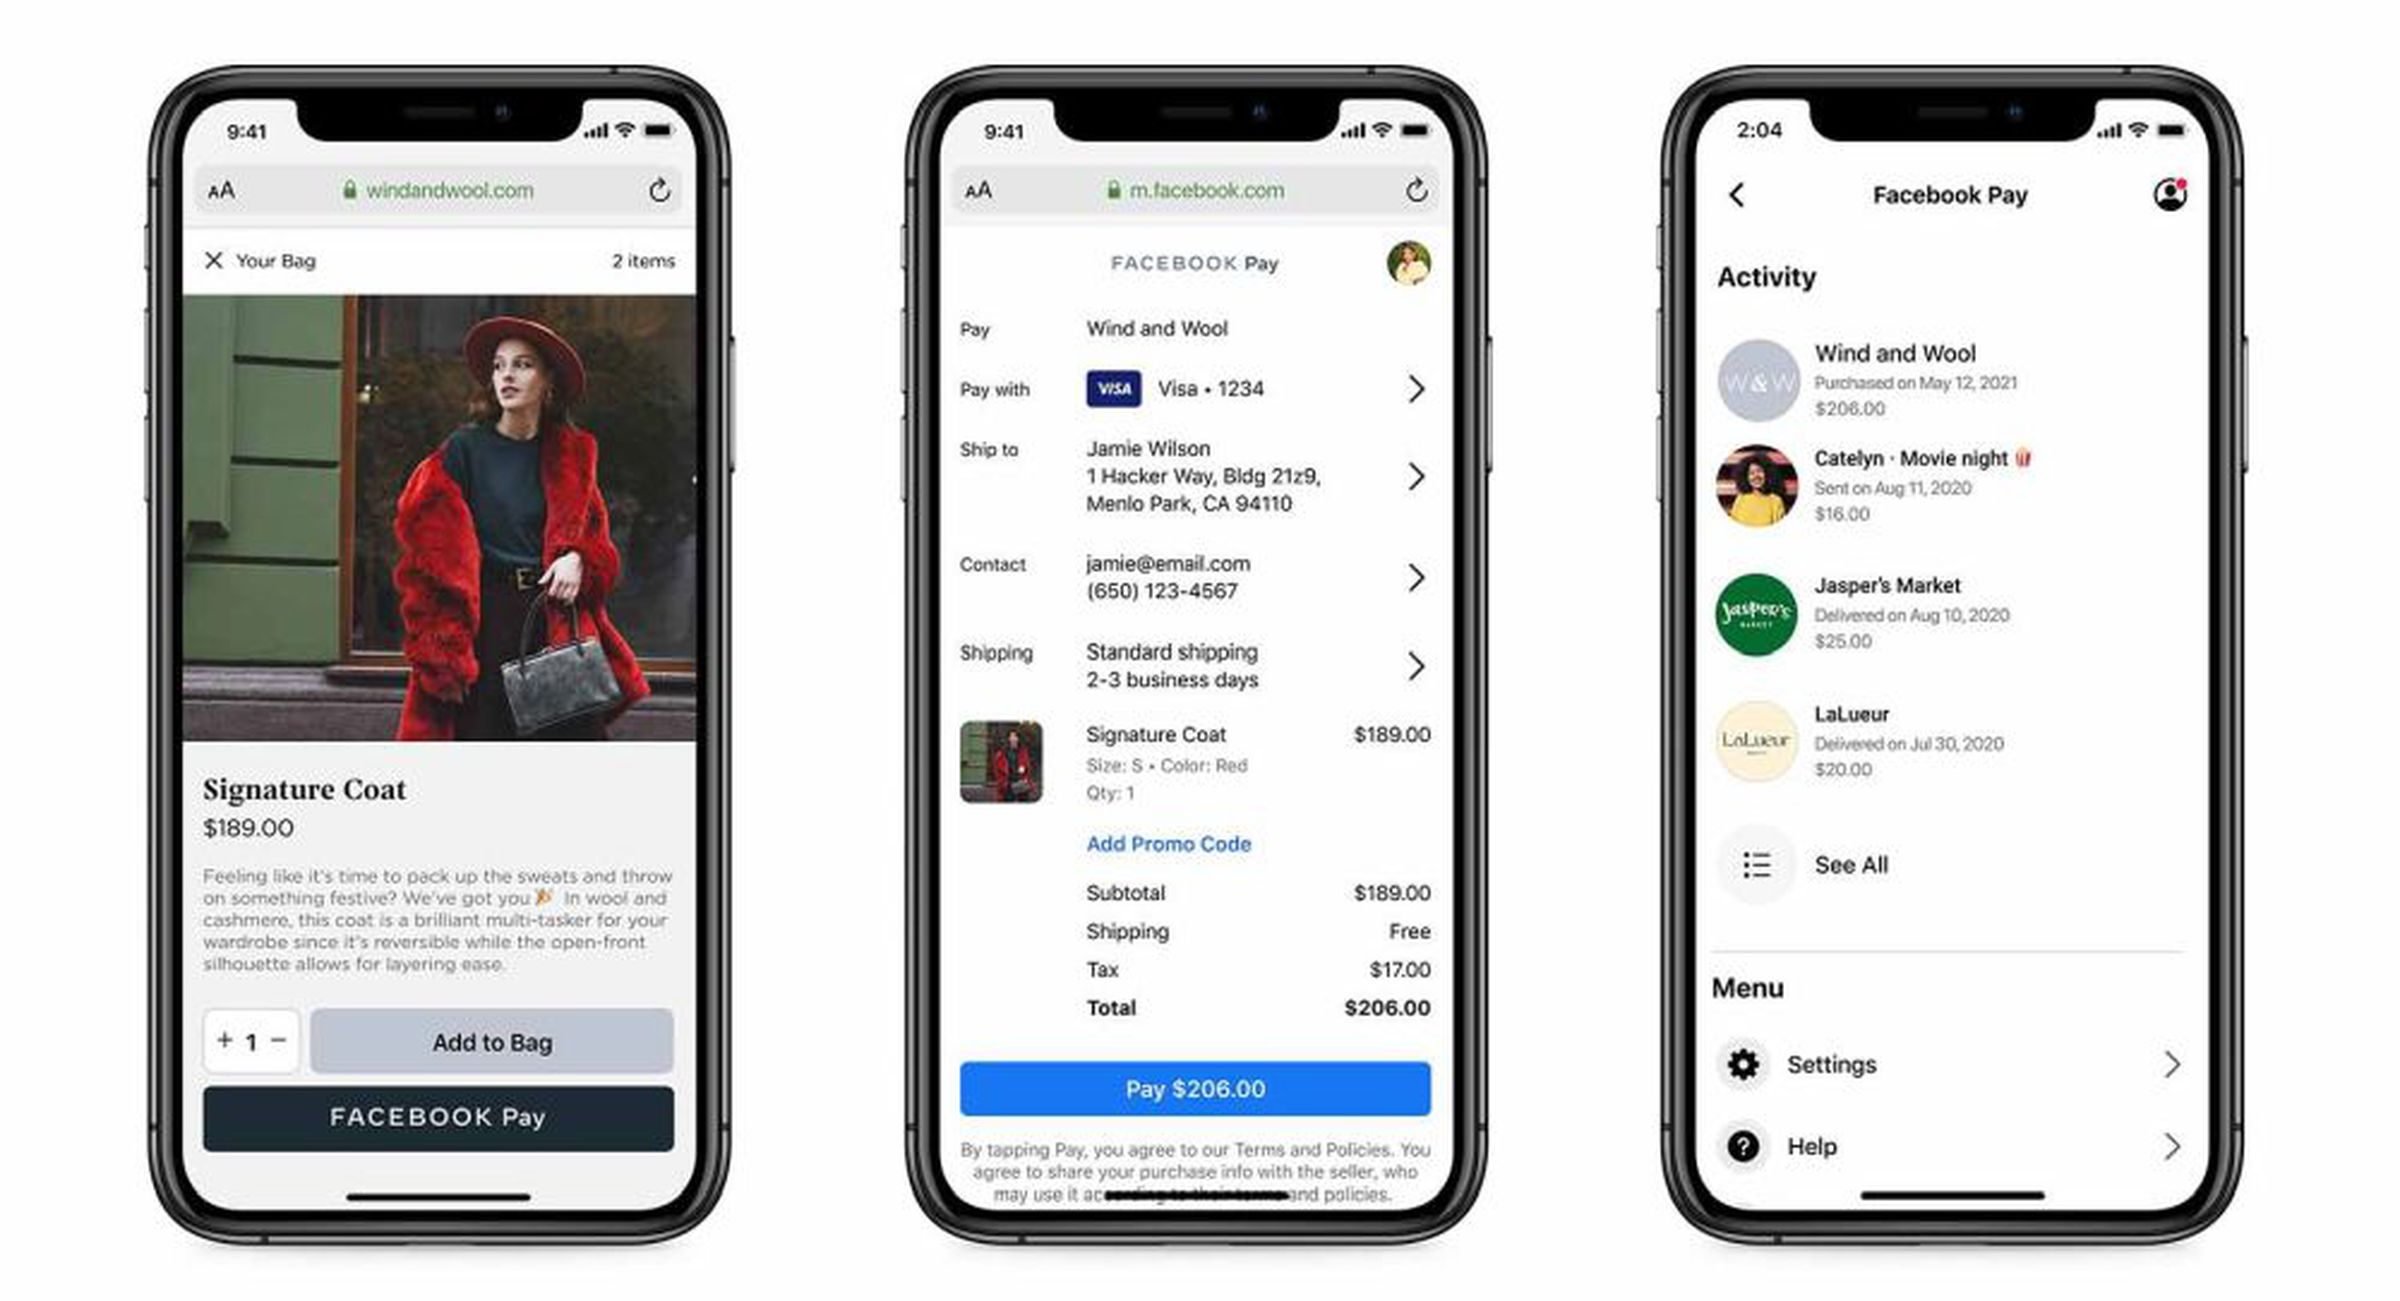 Facebook Pay is coming to online shopping.